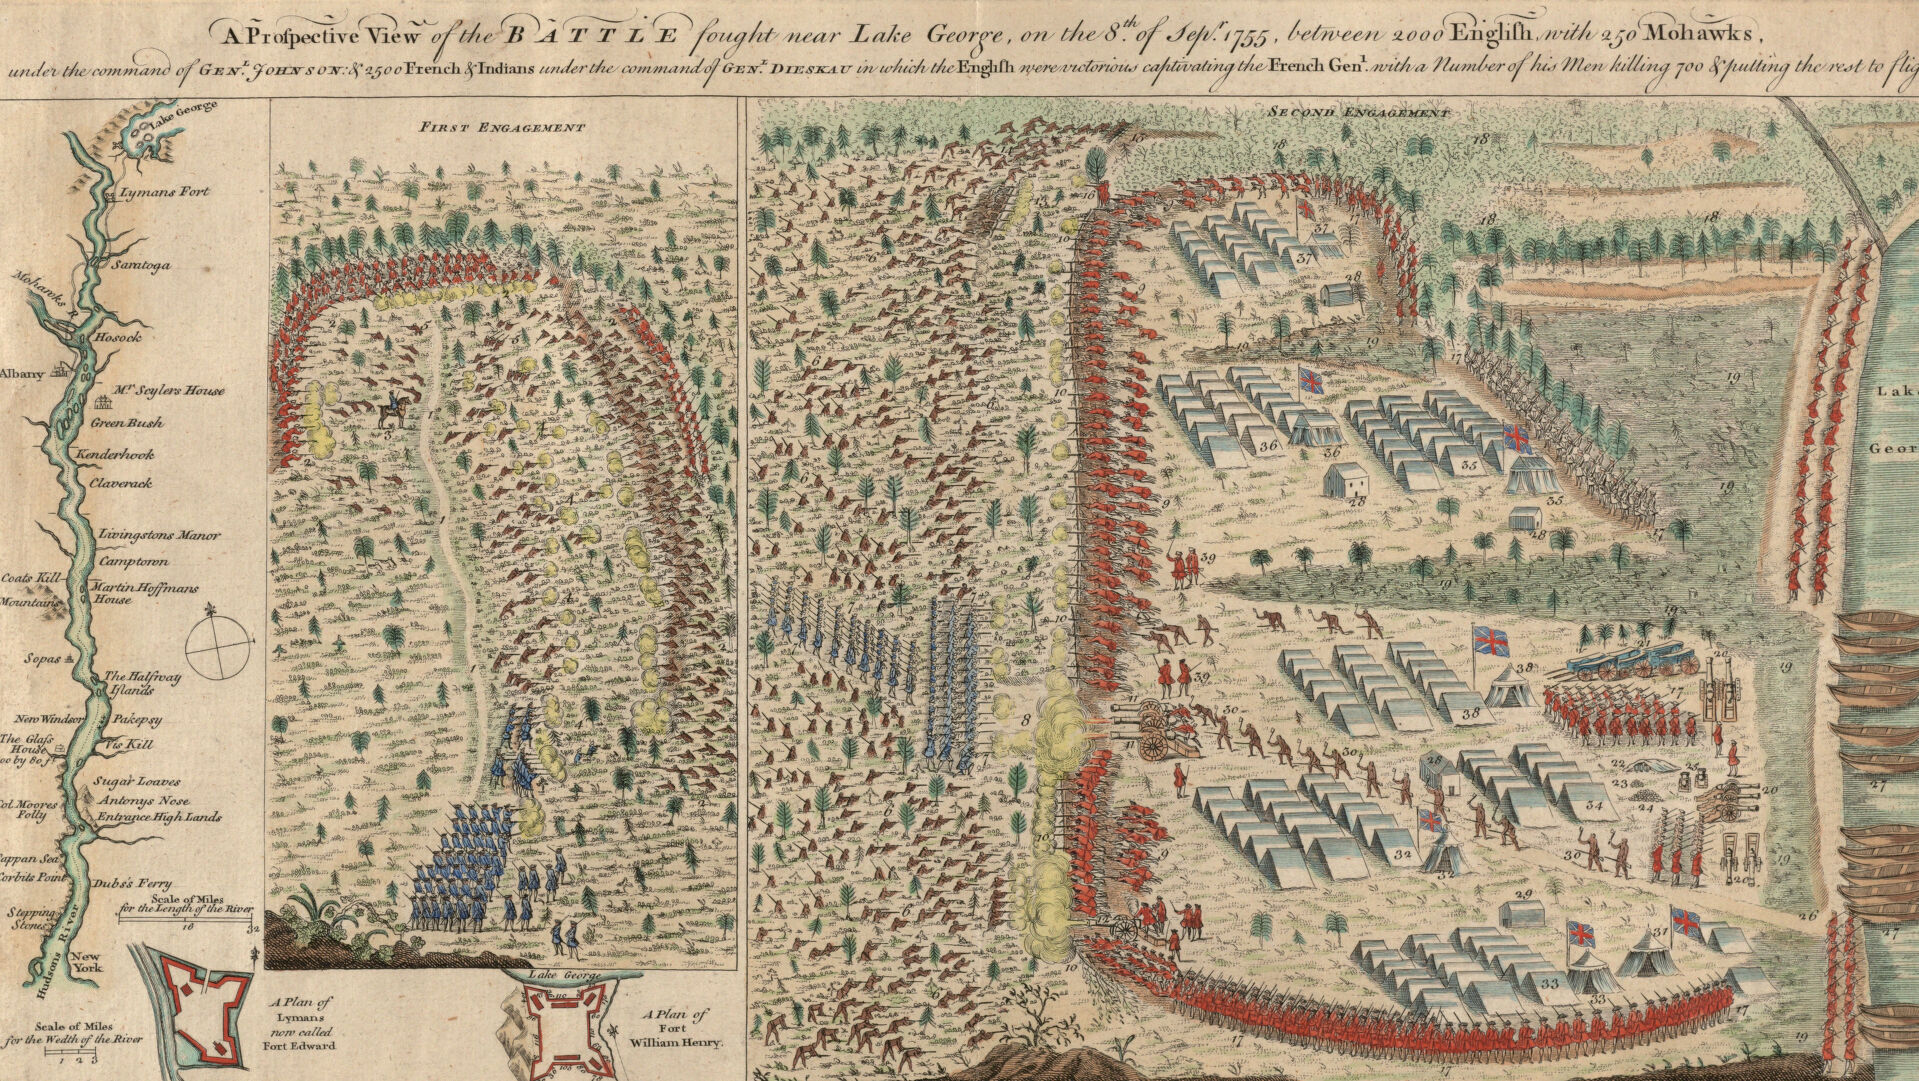 A map of the 1755 battle at Lake George, depicting individual troops engaged in comabt from a birds-eye perspective.